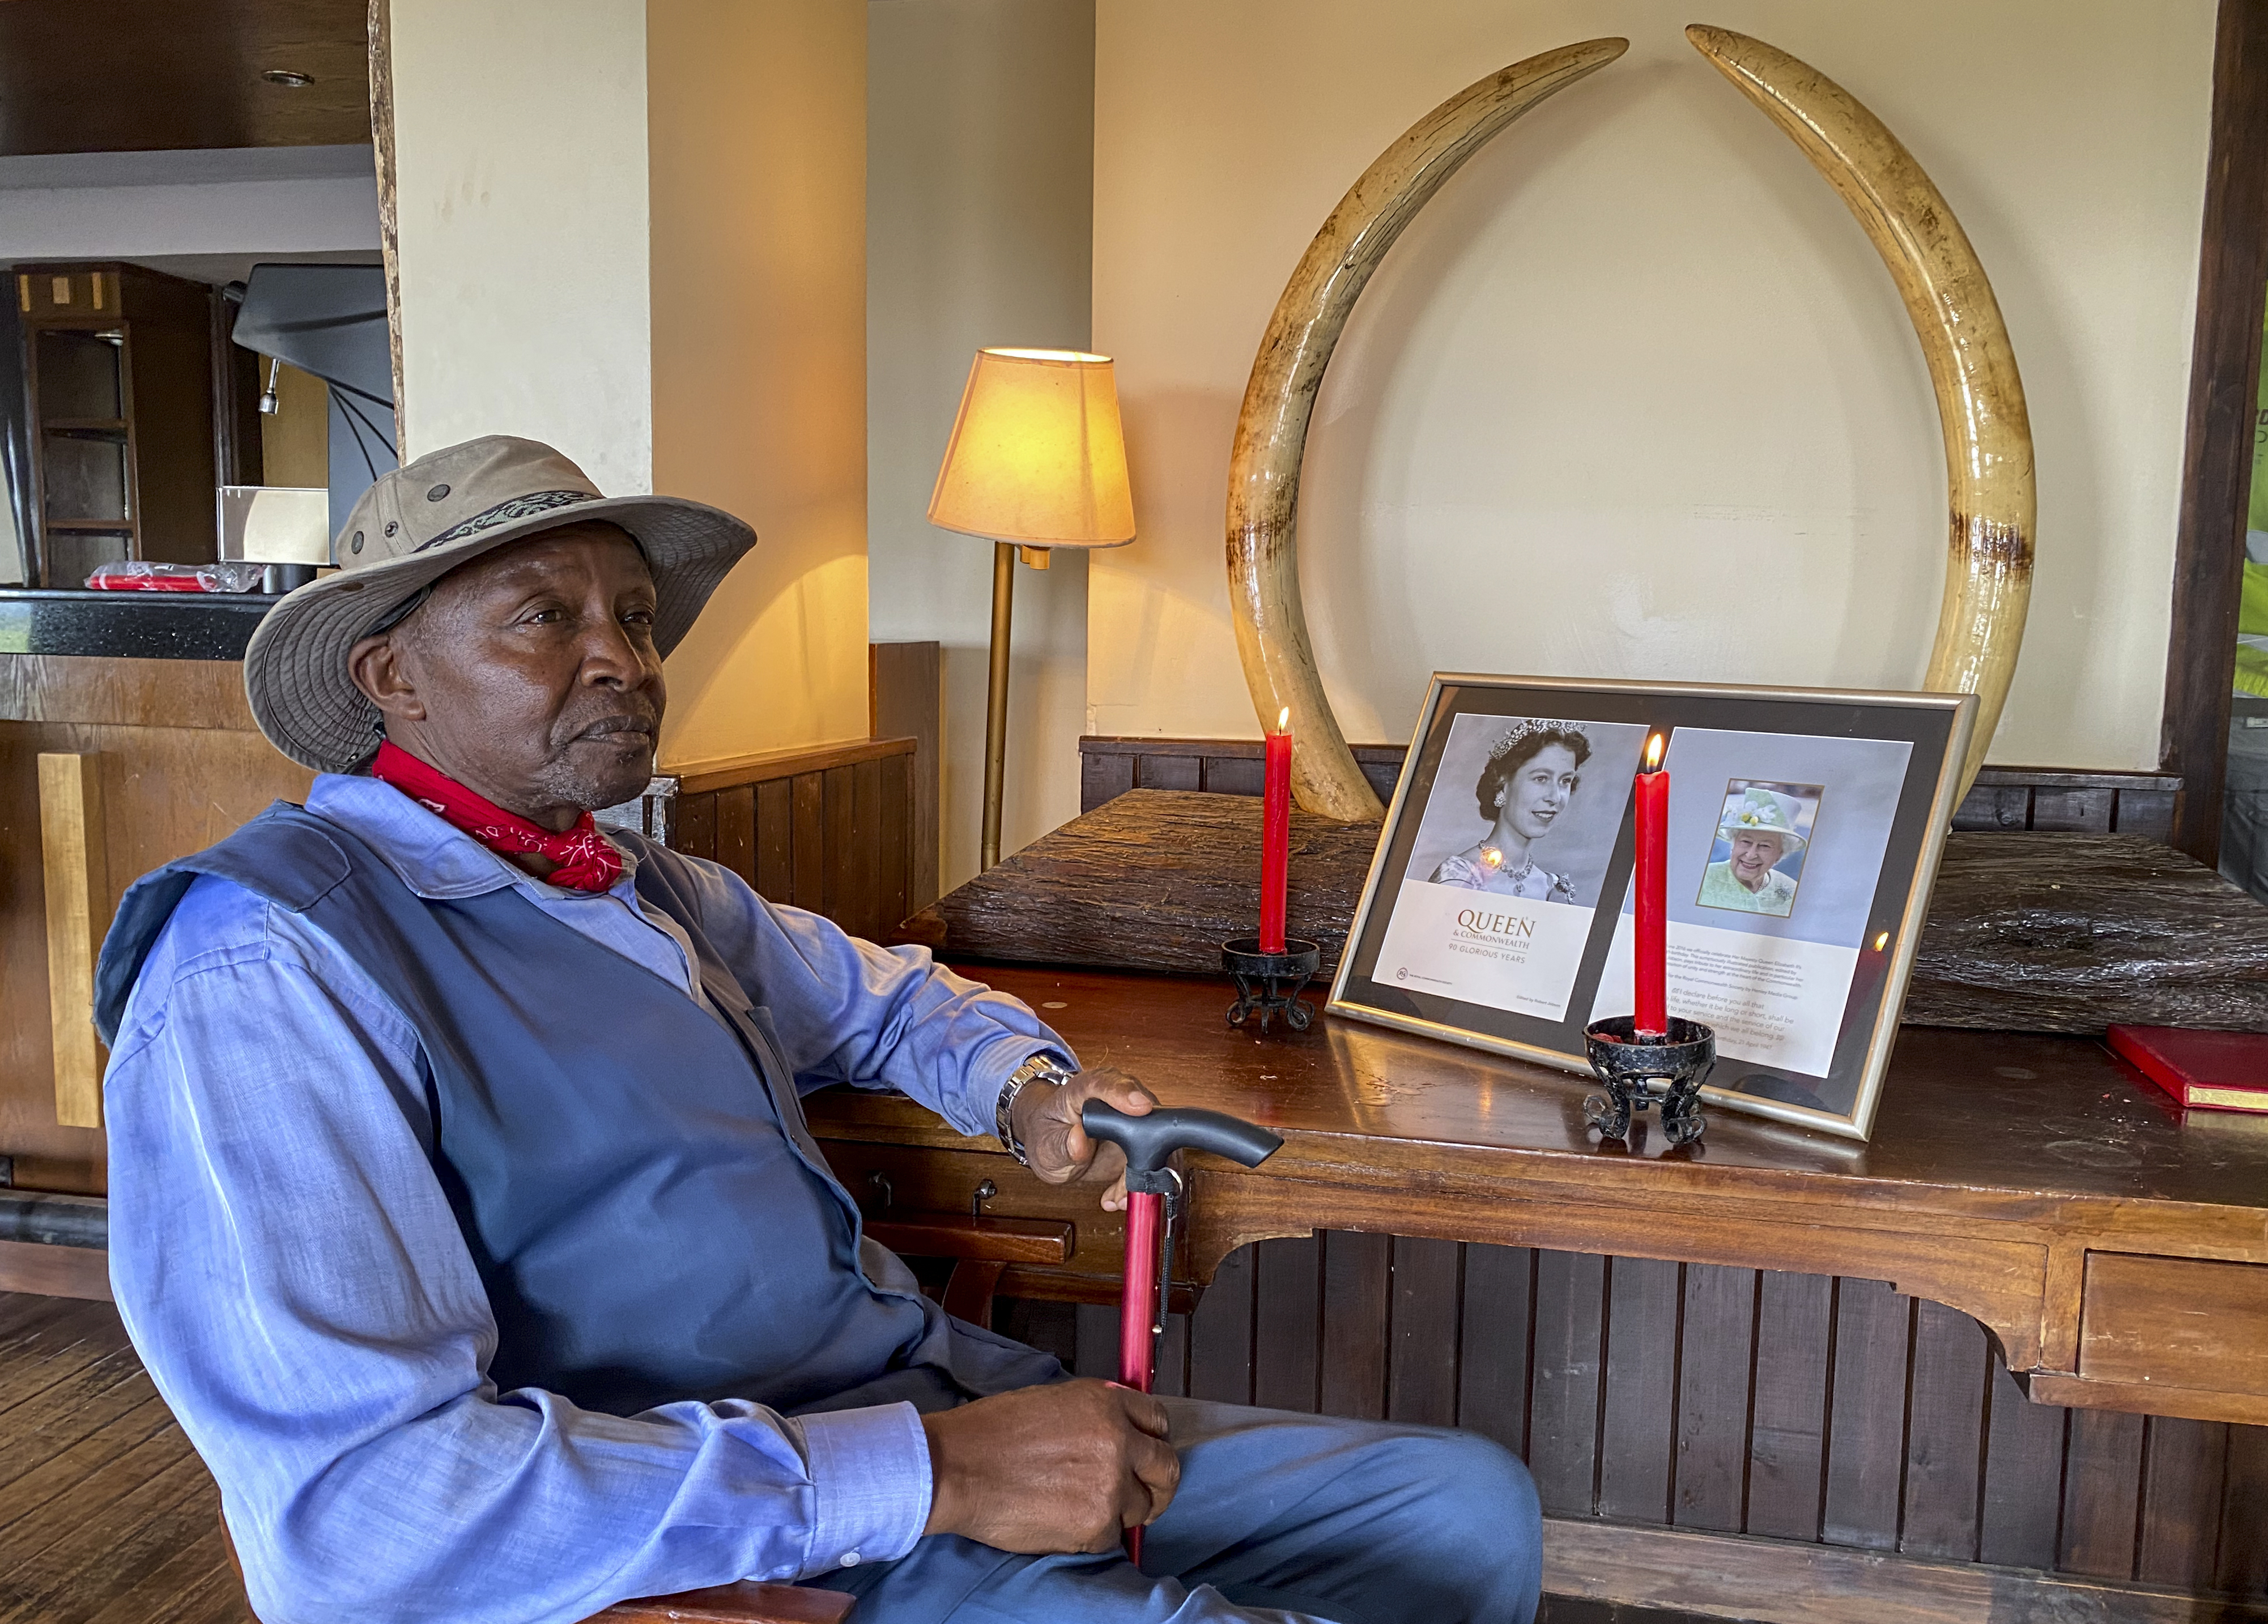 Amos Ndegwa, a naturalist and tour guide, lights a candle to pay tribute in the lounge of the Treetops Hotel in Kenya, where Britain's Queen Elizabeth II spent her last night as a princess. The hotel, in Kenya's Aberdare National Park, closed because of declining tourism during the coronavirus pandemic.